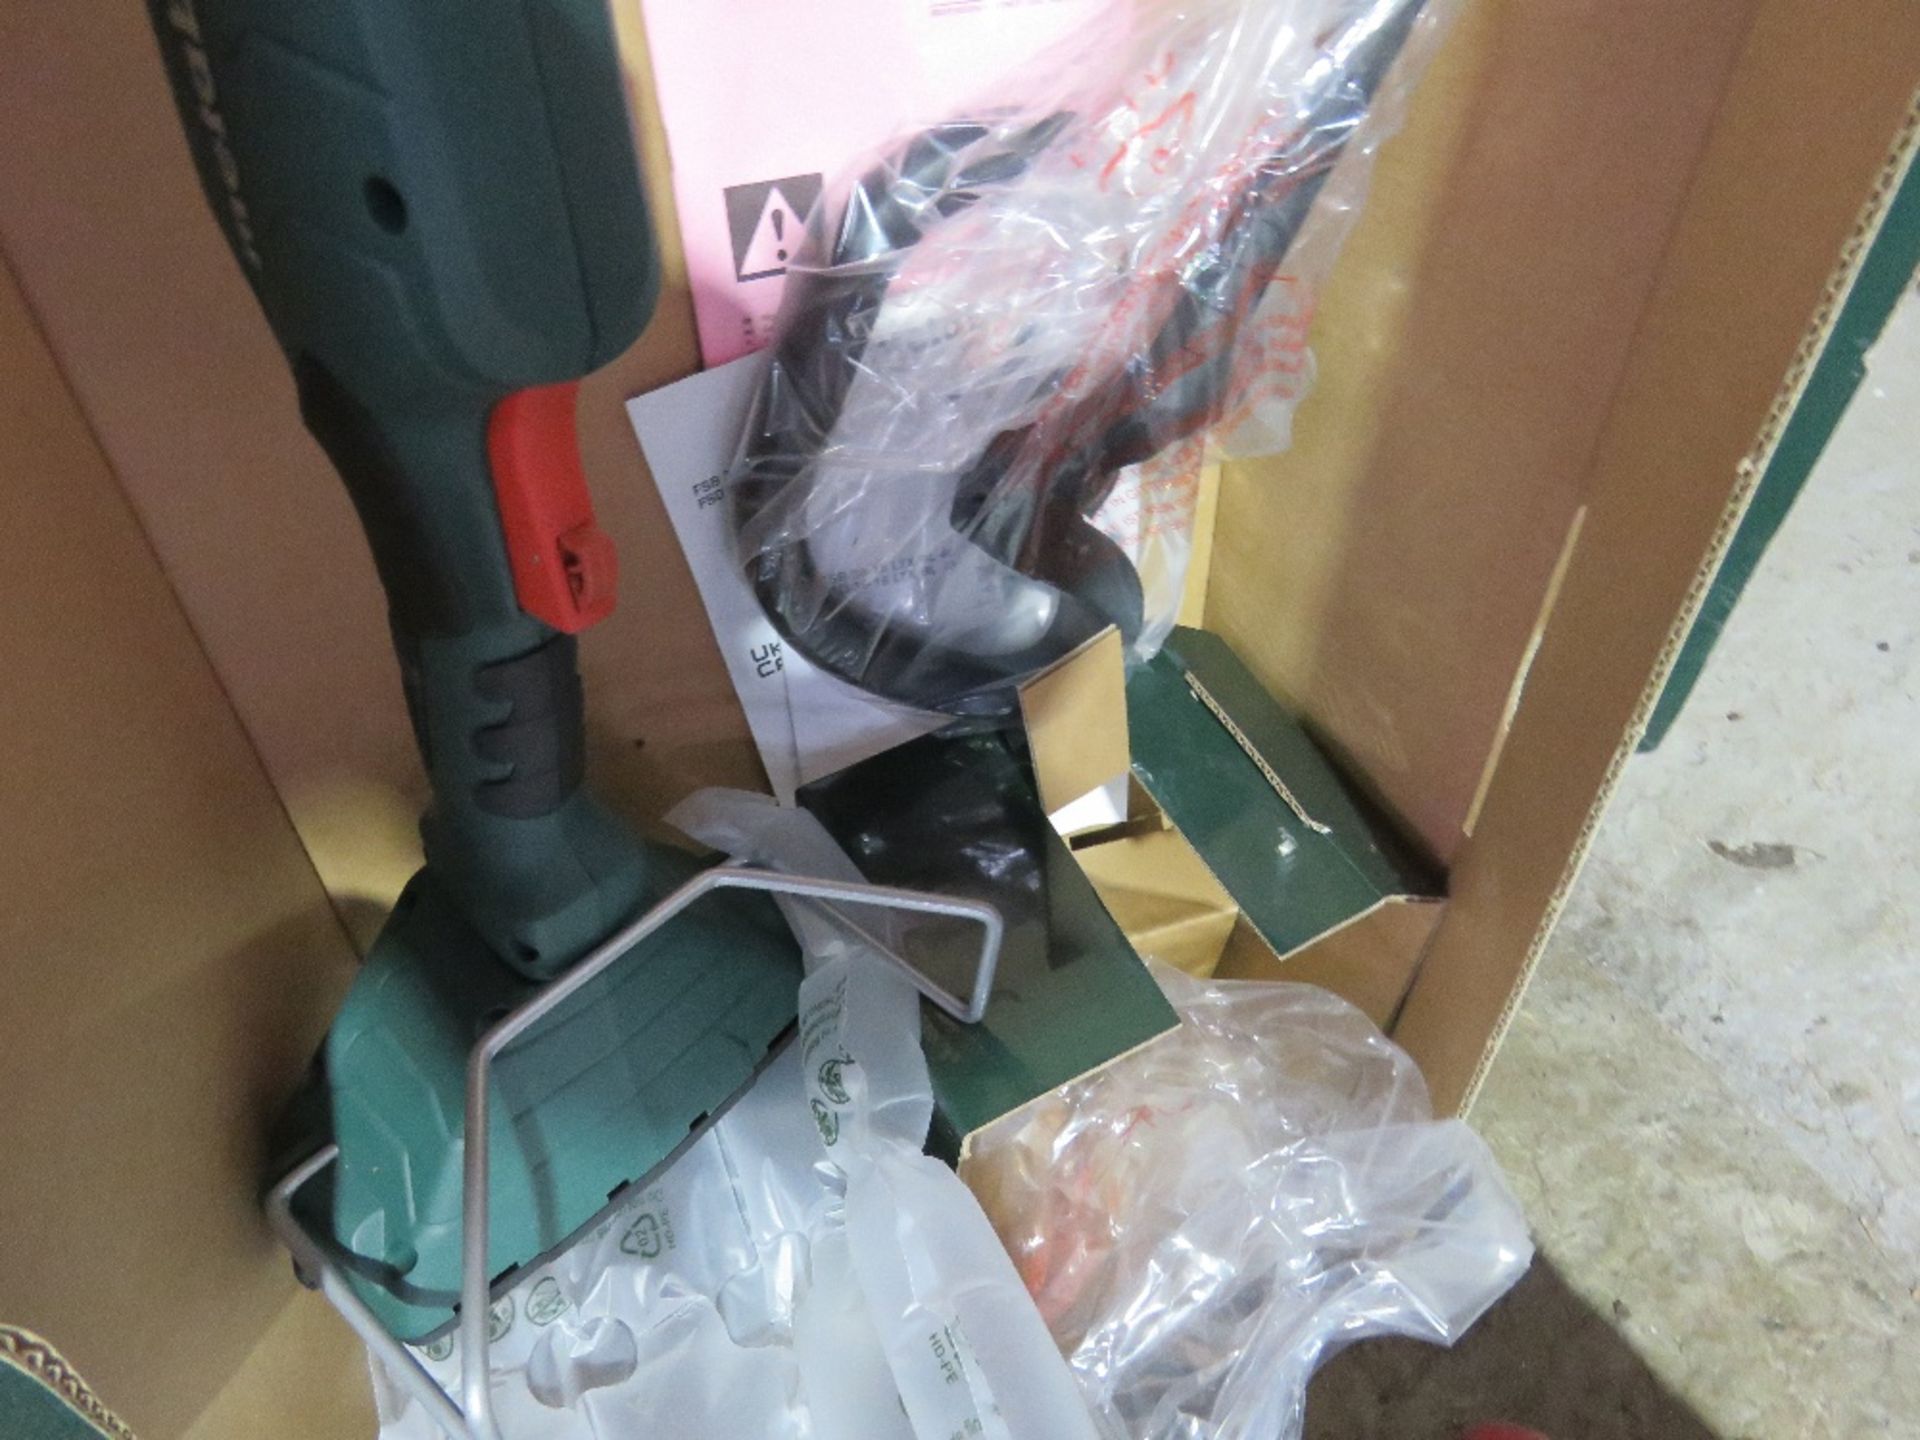 2 X METABO FSB 36-18 BATTERY POWERED STRIMMERS, BOXED, UNUSED (NO BATTERIES OR CHARGERS) - Image 3 of 3